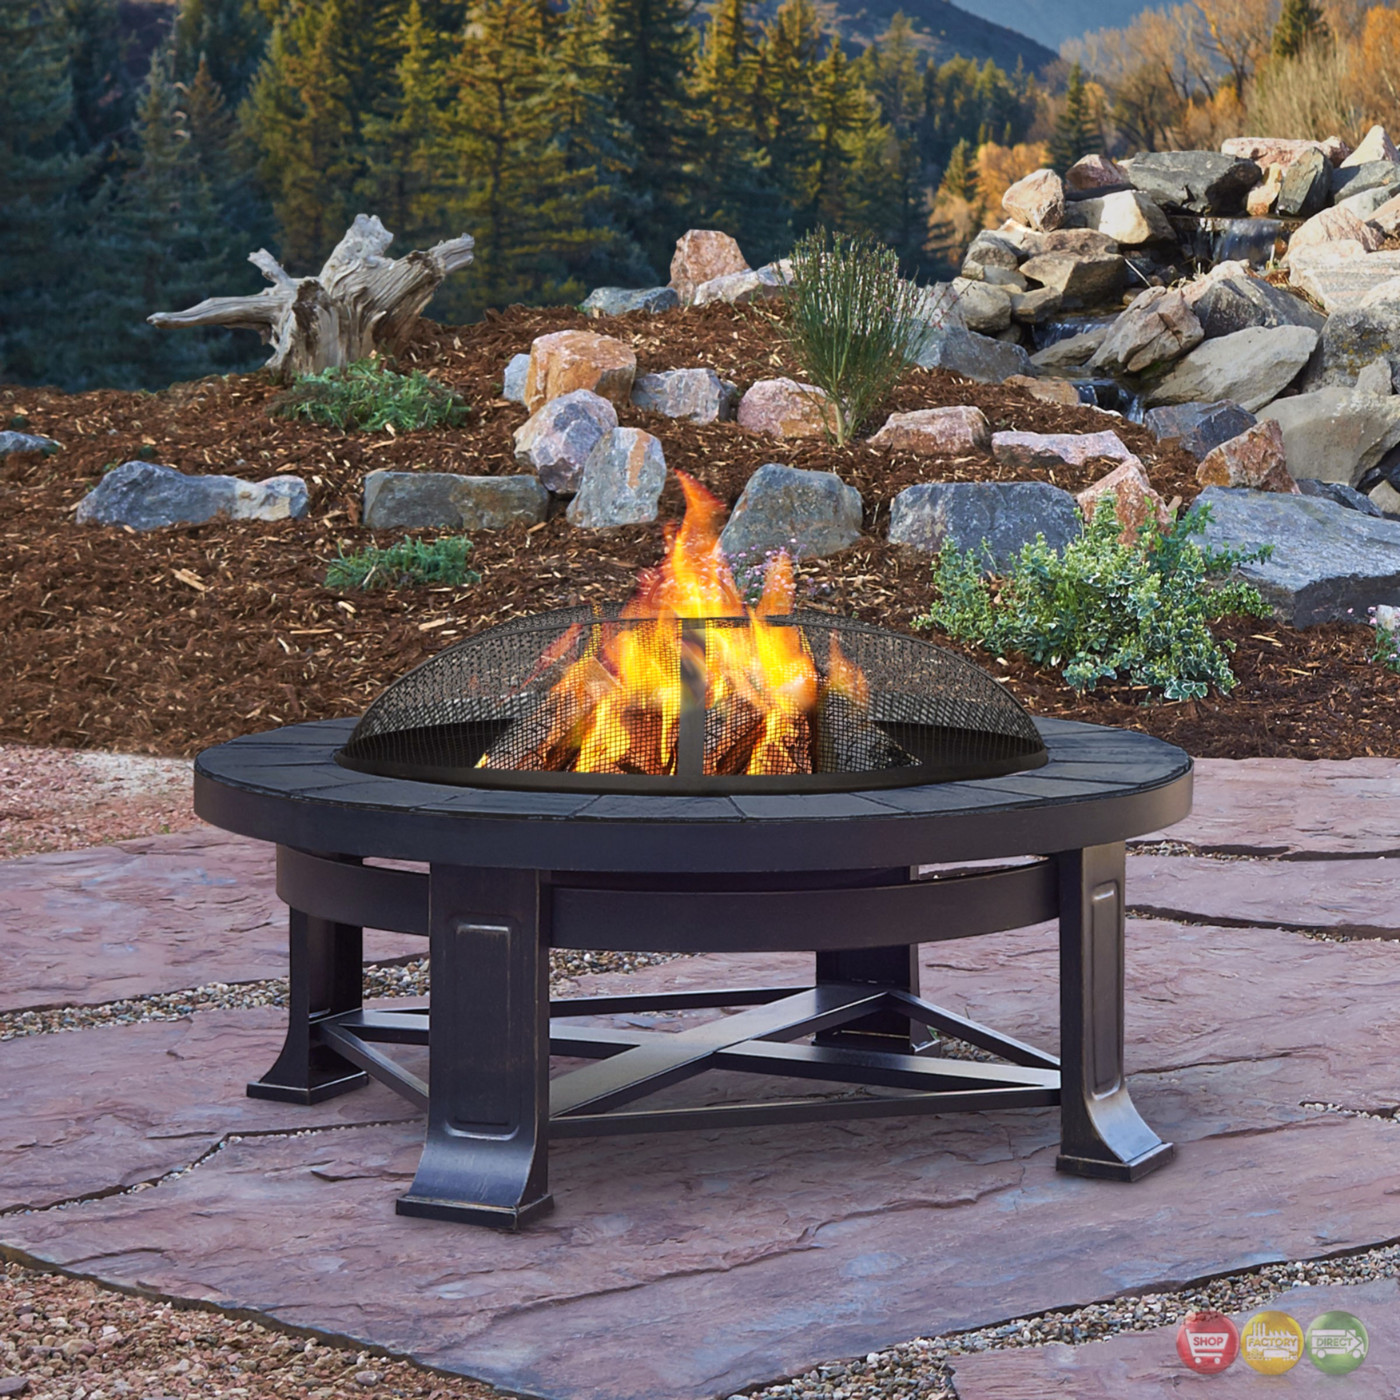 Outdoor Landscape Firepit
 Edwards Outdoor Wood burning 34" Round Fire Pit With Gray Tile